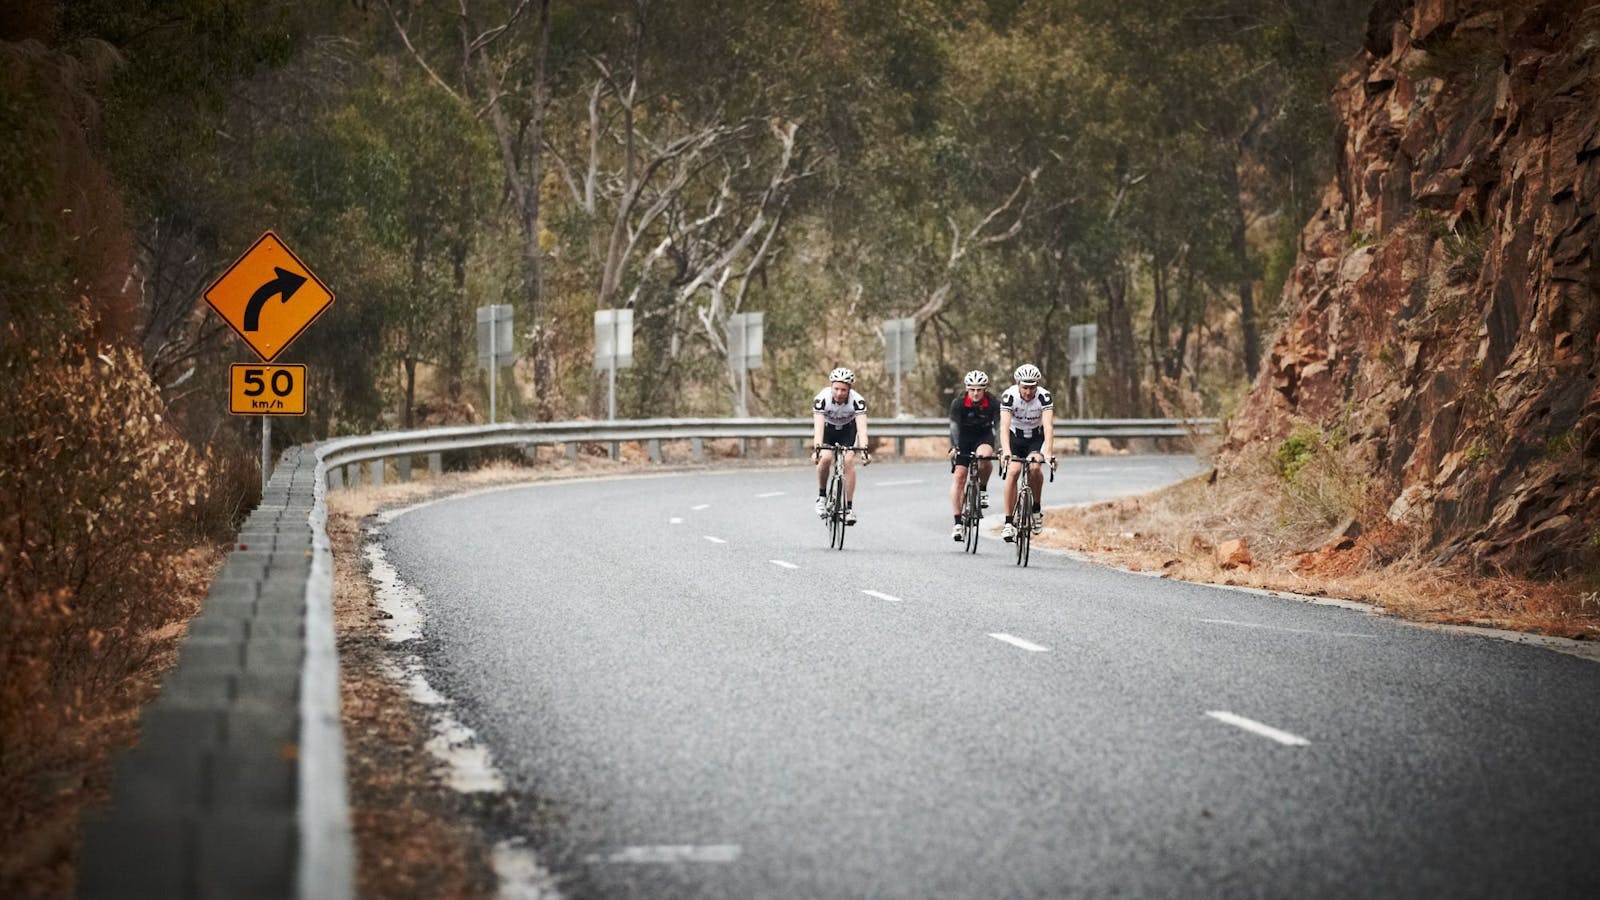 Cyclists road riding down a hill gum trees in background rocky cliff face on right hand side